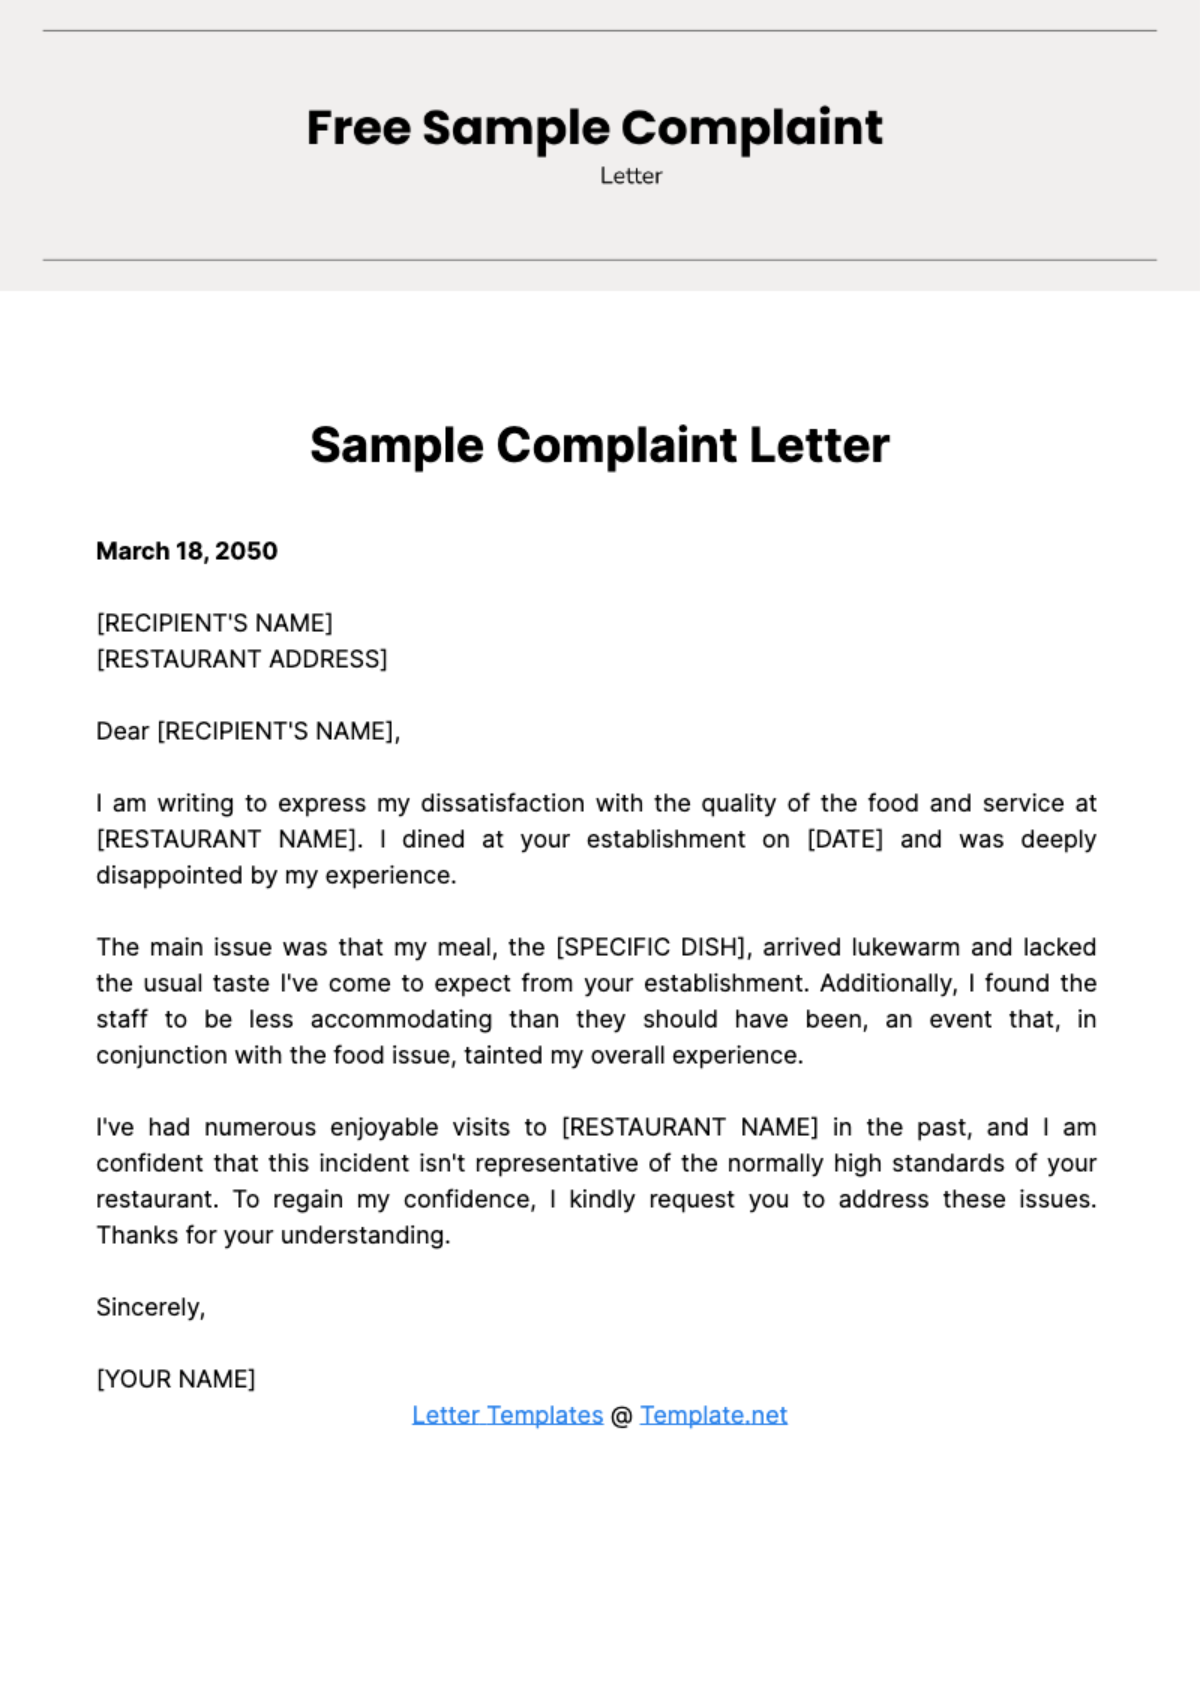 Free Sample Complaint Letter Template